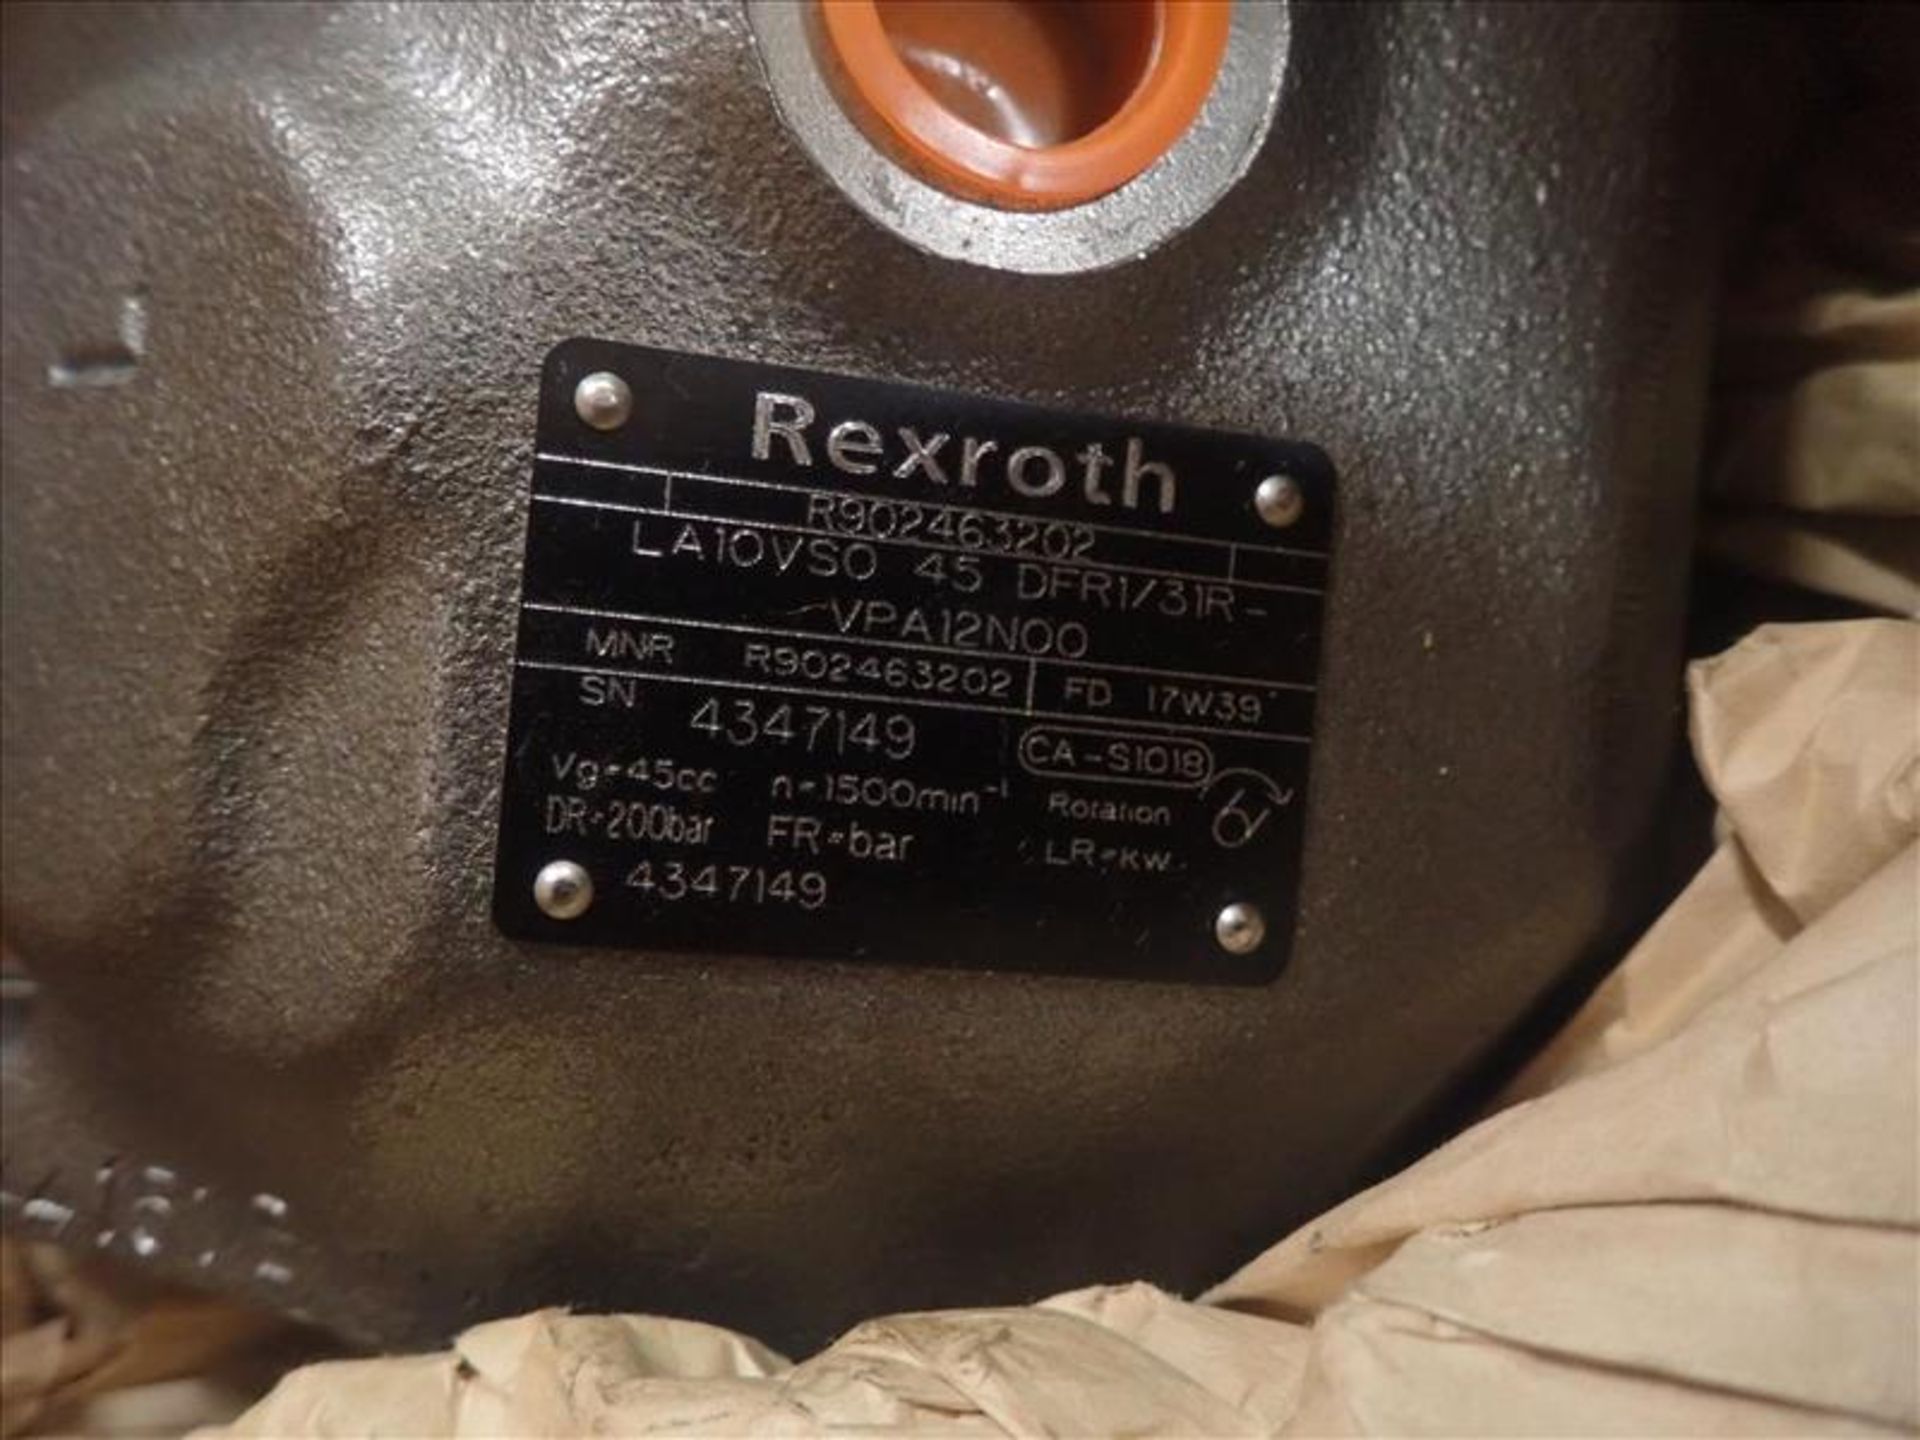 Rexroth gearbox (Tag 7920 Loc WH South) - Image 2 of 2